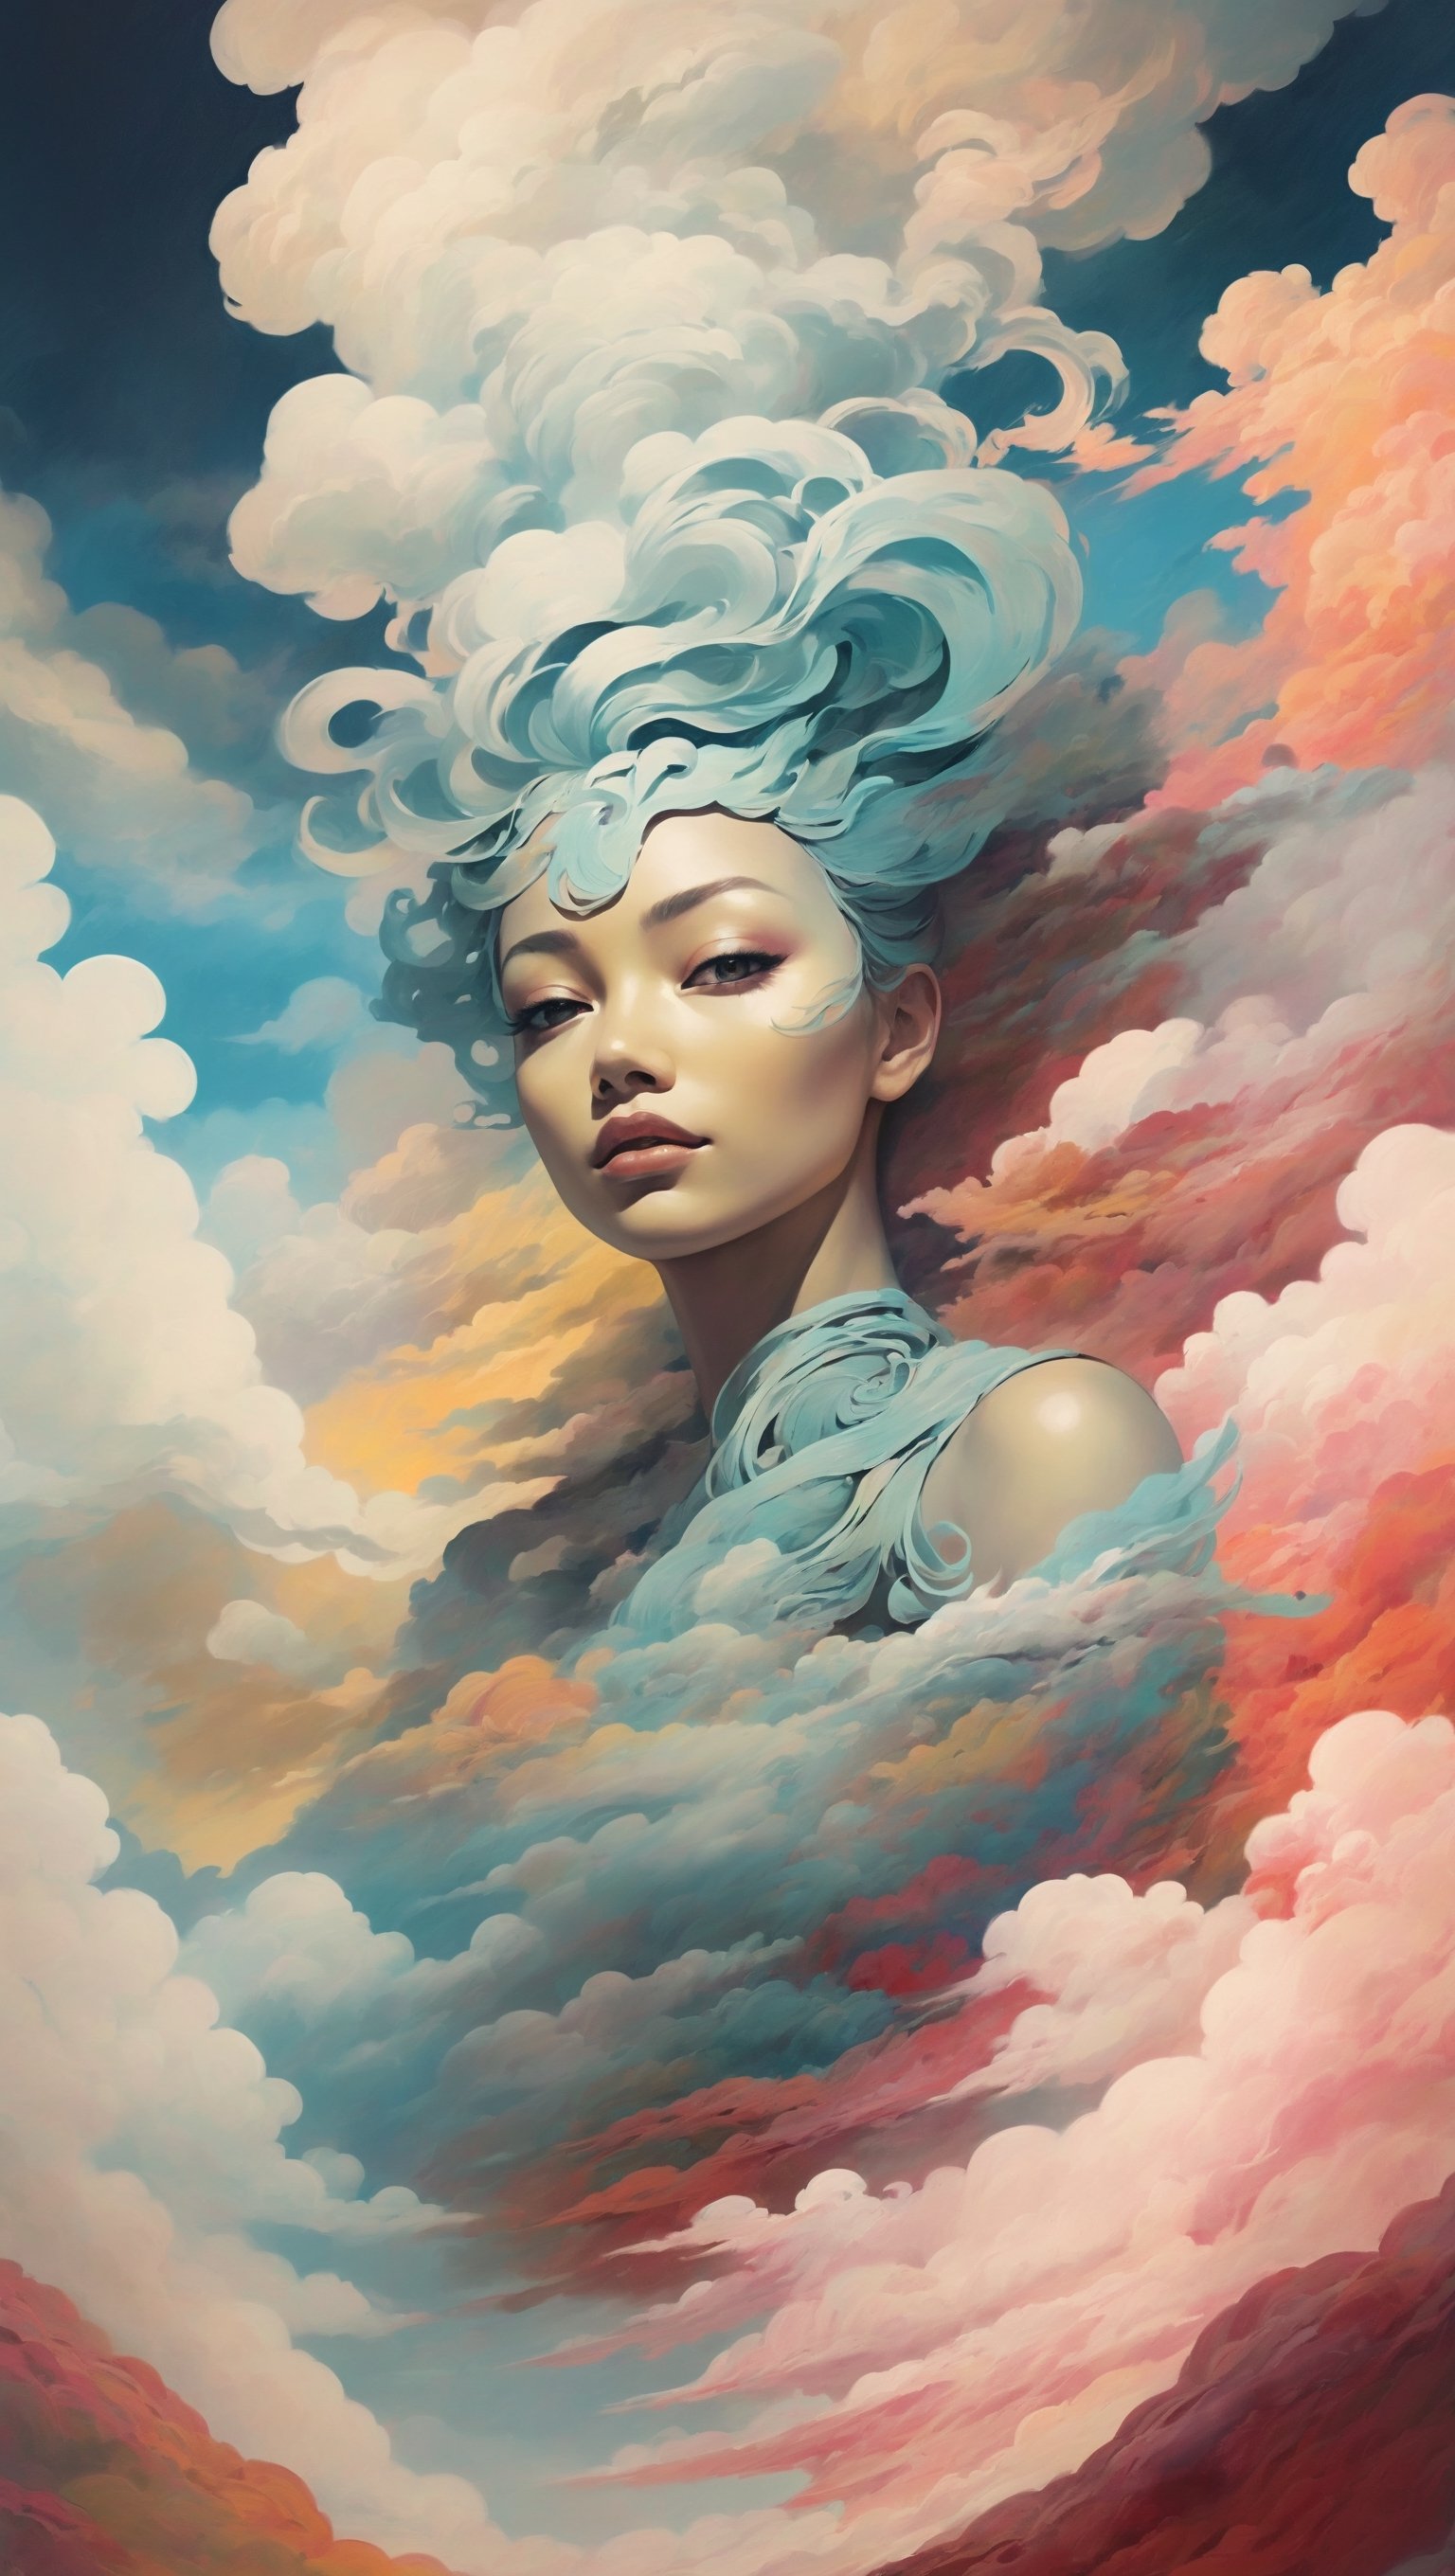 create abstract picture where mountain is a center of exposure and colorful clouds above mountain create a beautiful woman face. She is the guardian spirit of mountain, her face painted in primal style. Prevail soft colors, create inspire embience